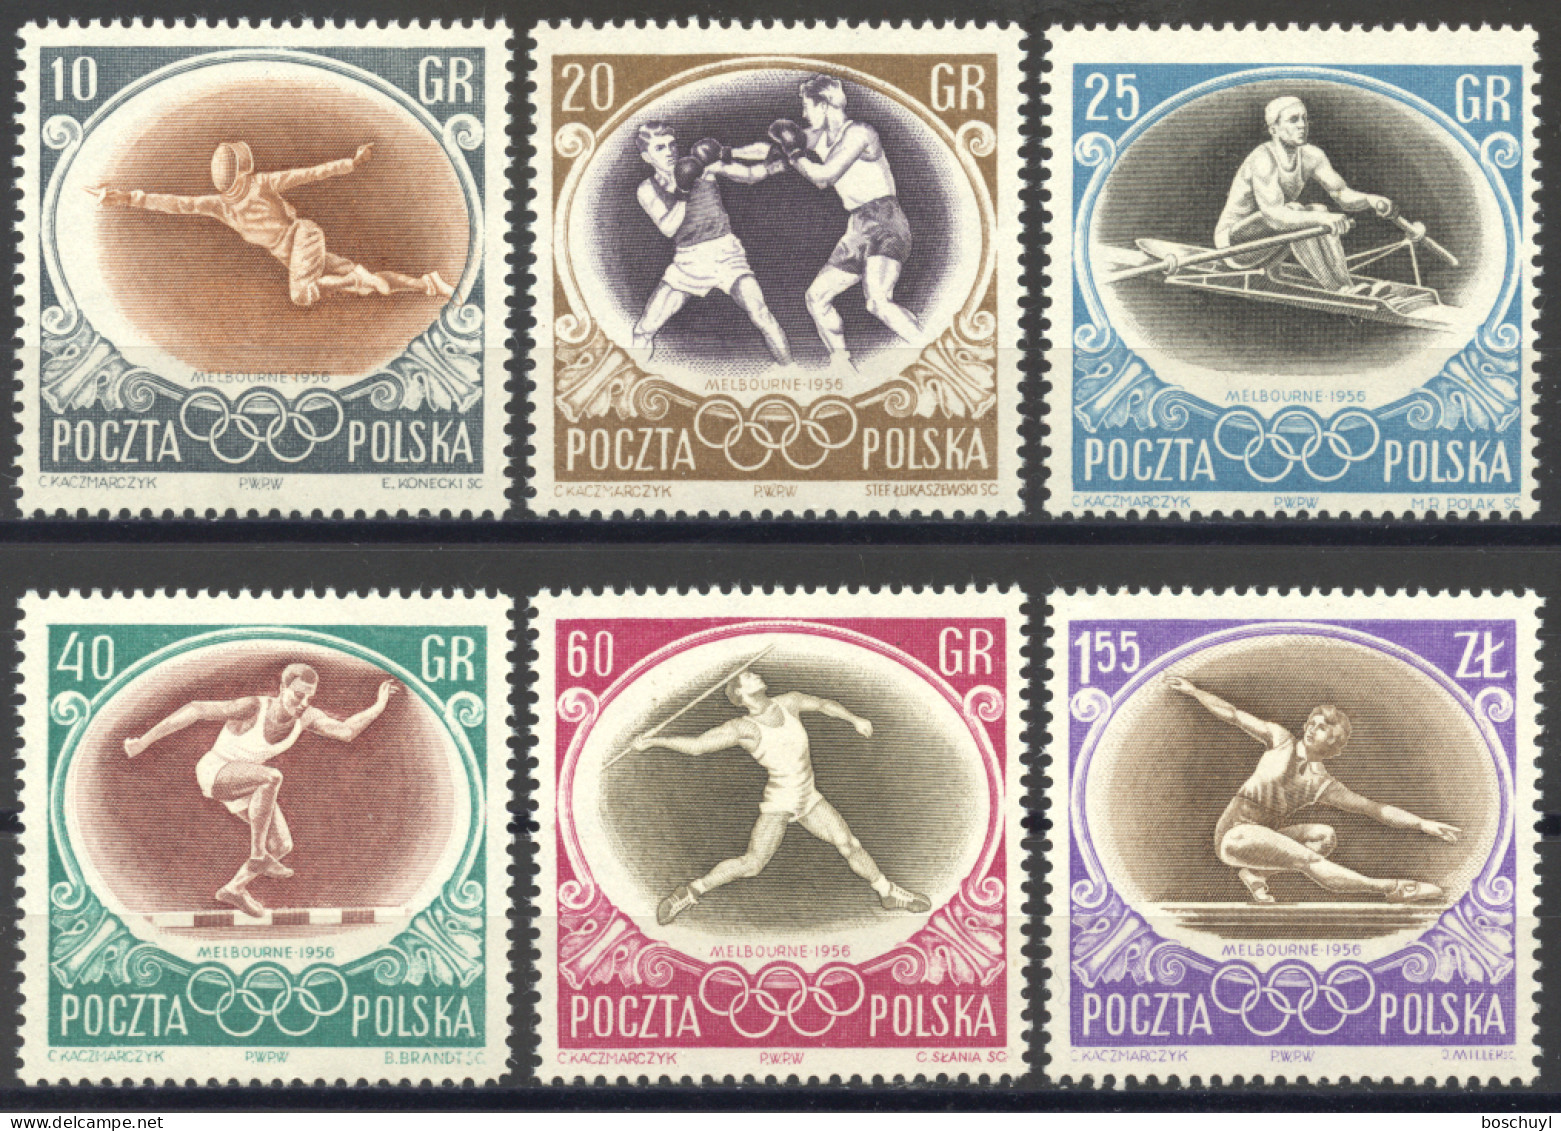 Poland, 1956, Olympic Summer Games Melbourne, Sports, MNH, Michel 984-989 - Neufs